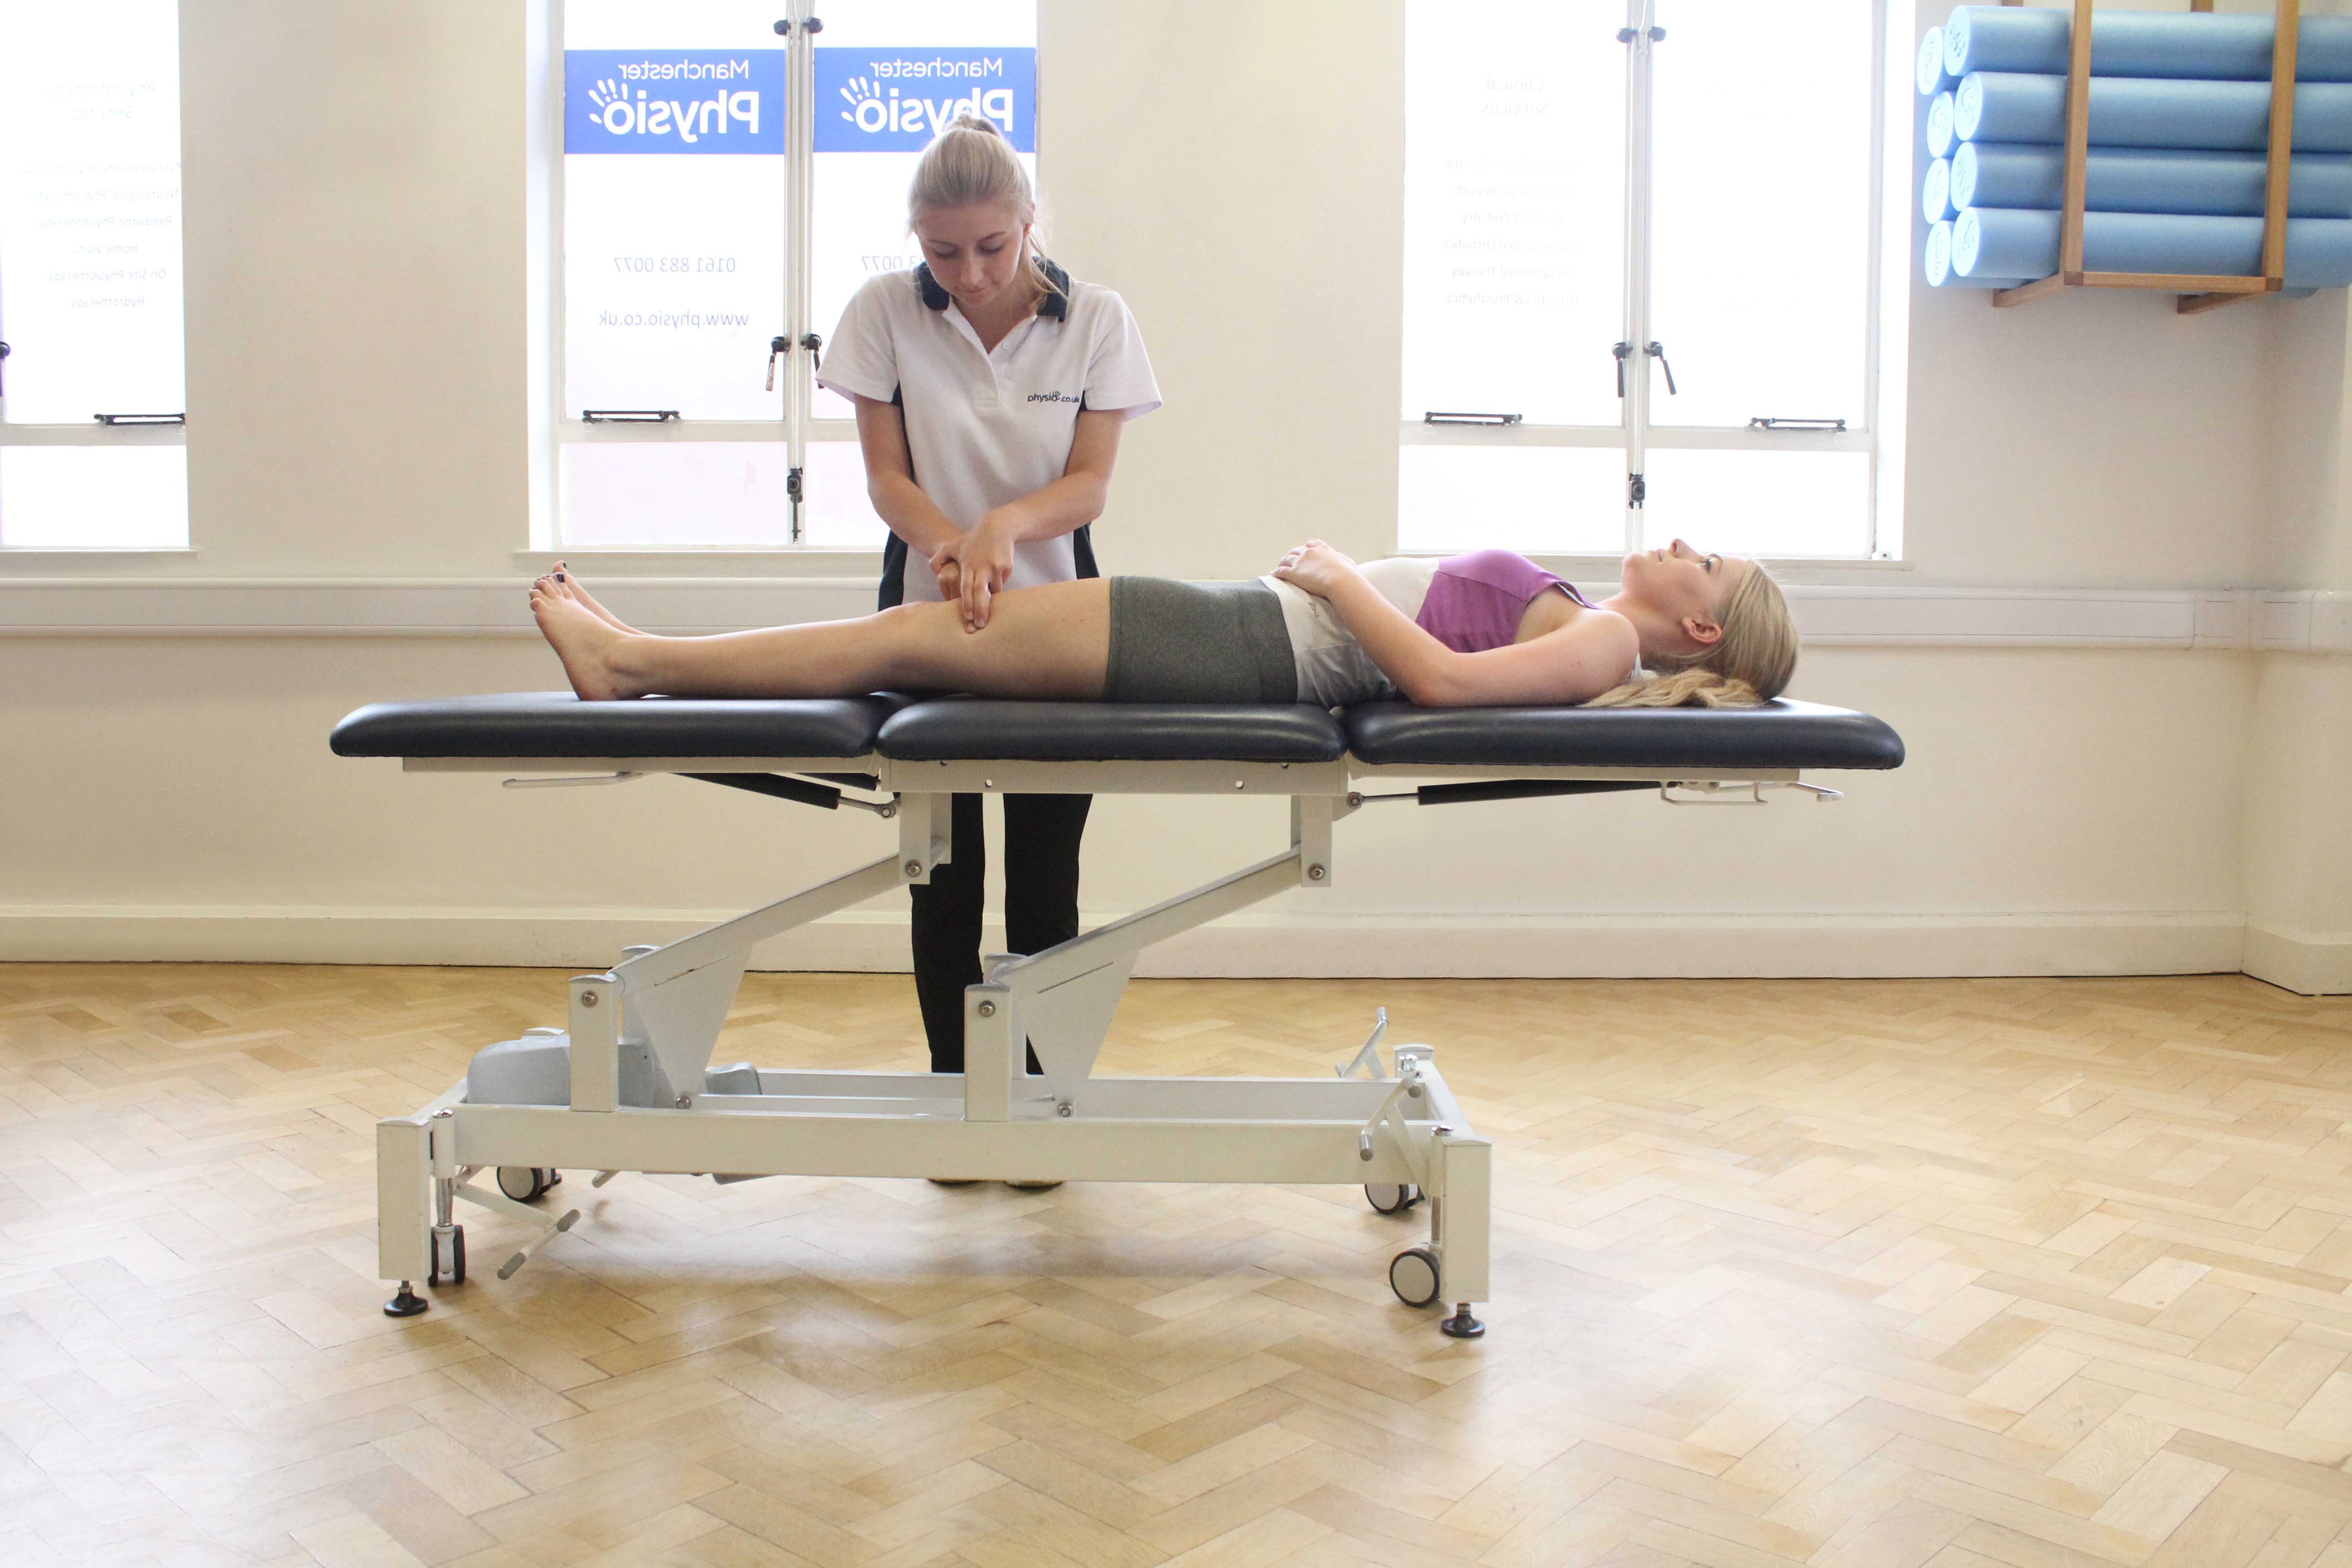 Hacking percussion massage of the quadricep muscles by a specialist MSK therapist